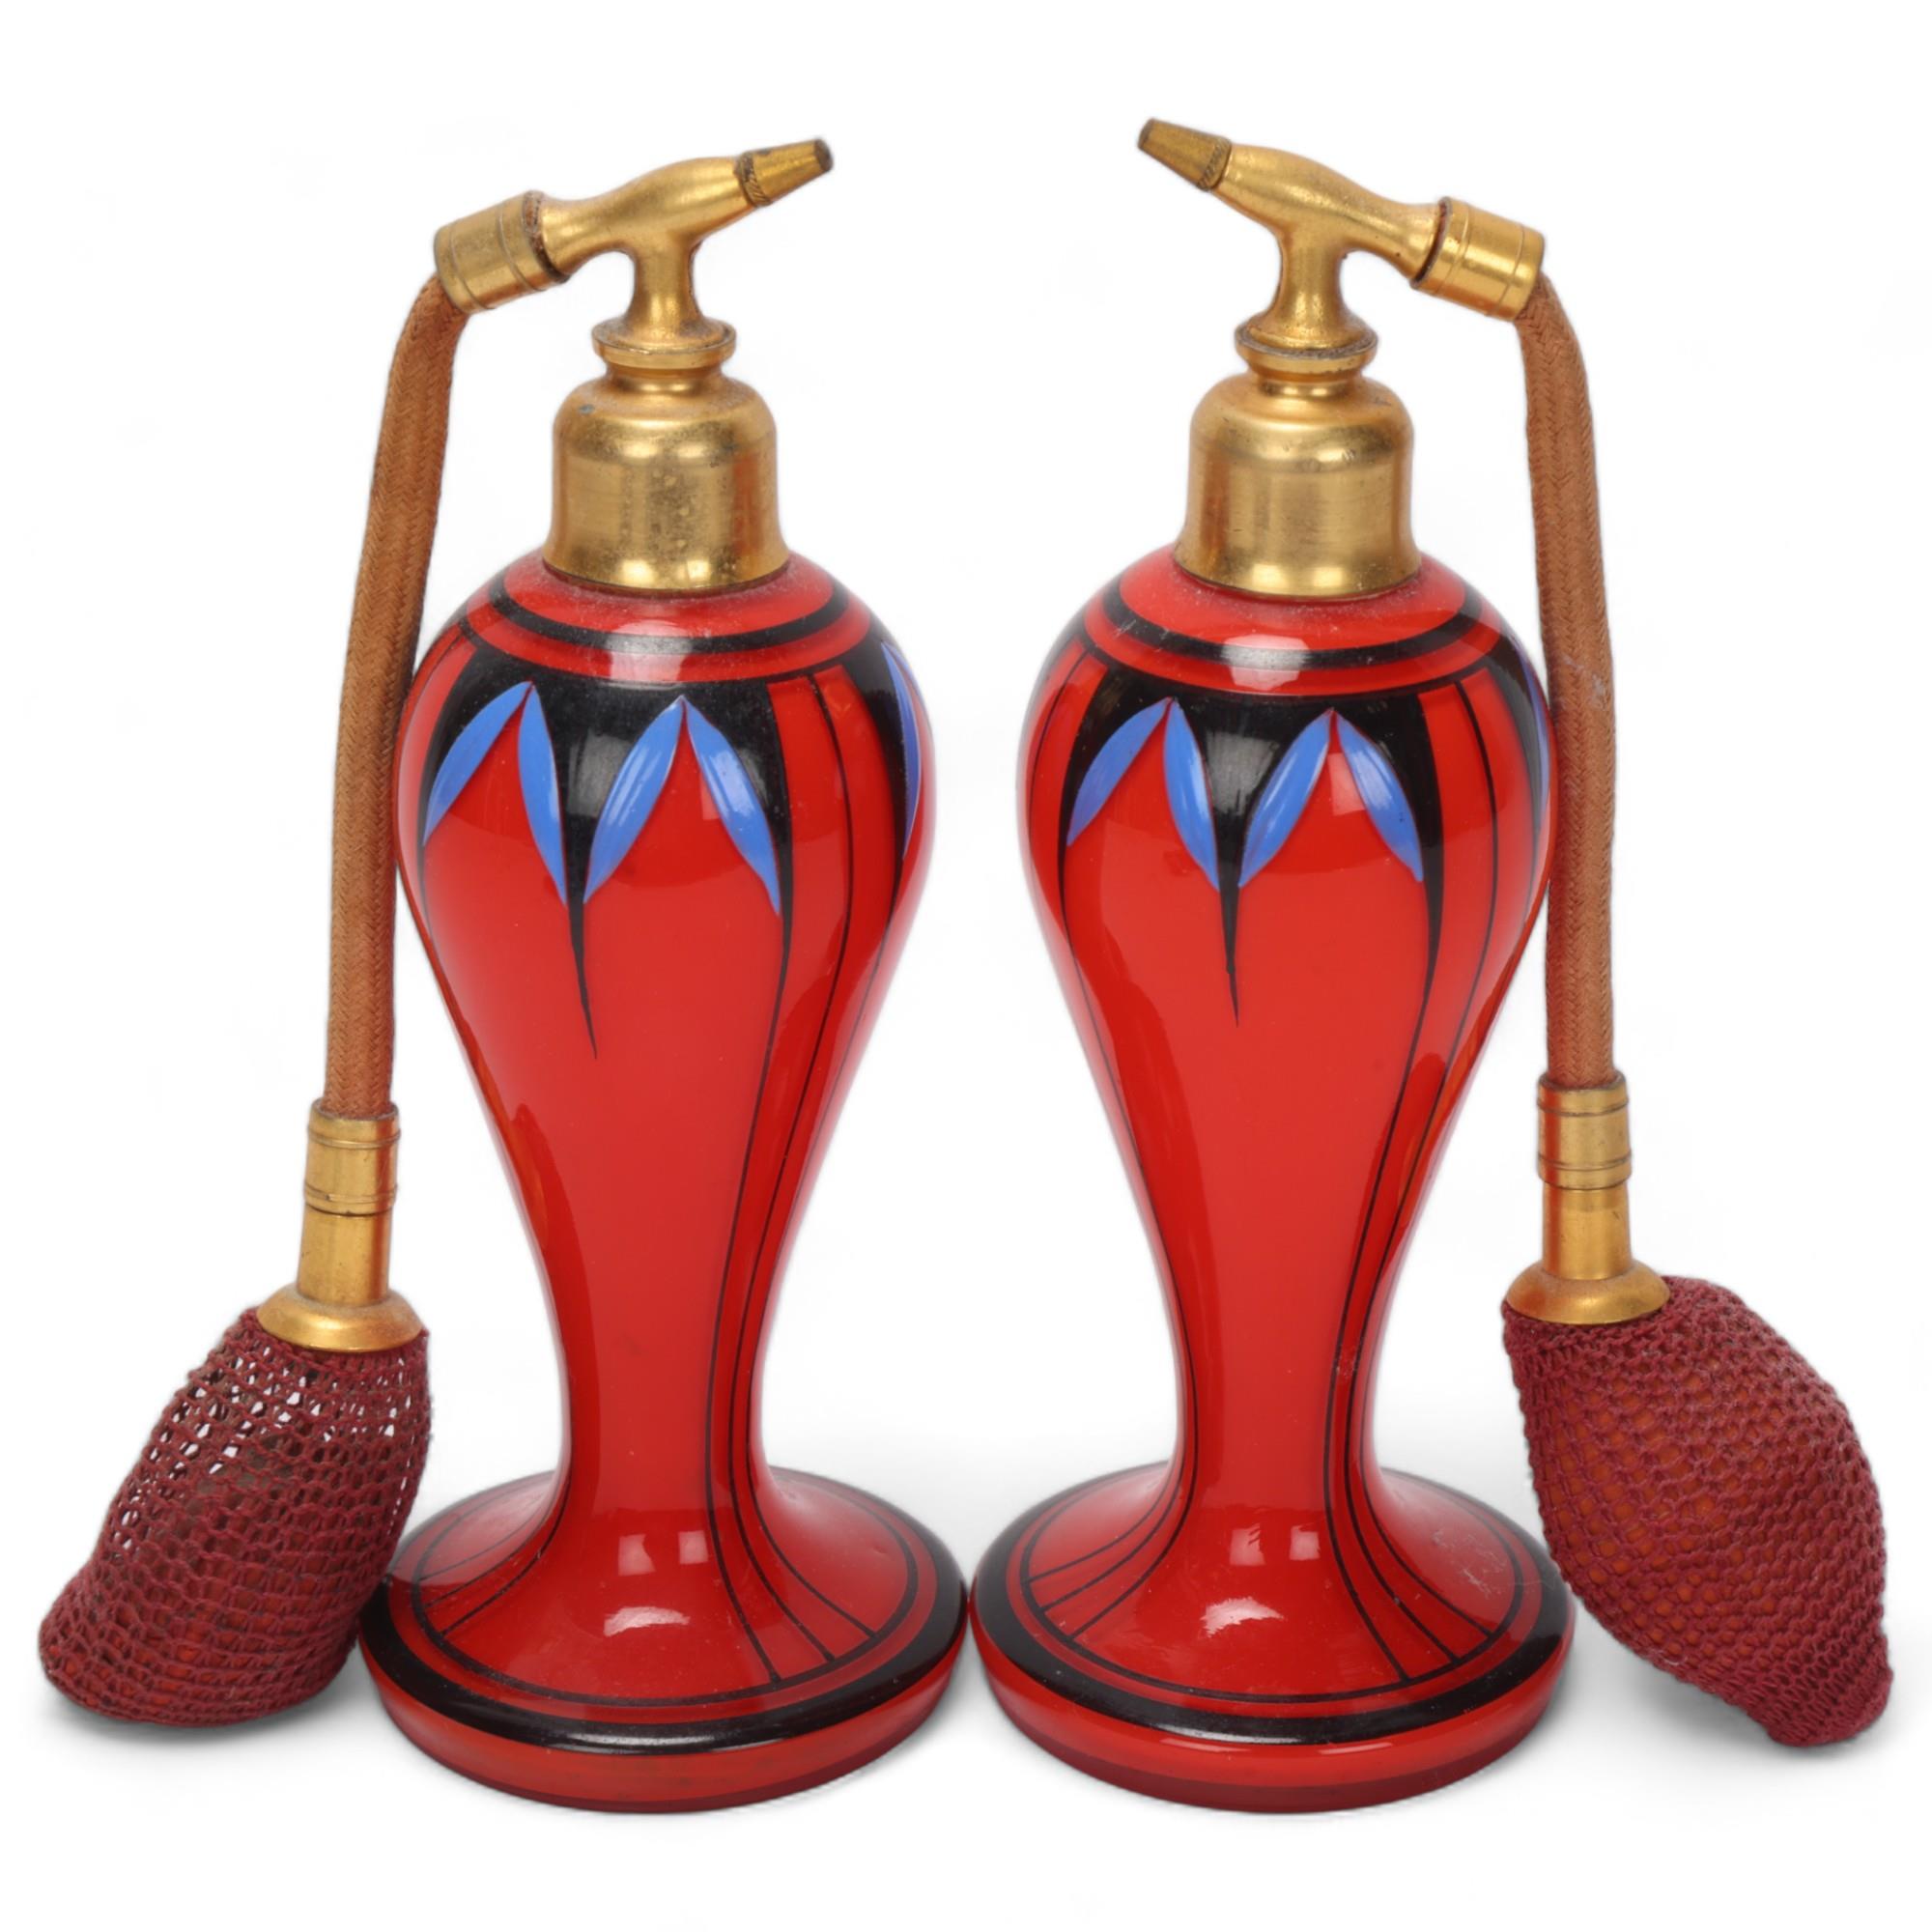 Pair of Art Deco red glass atomiser perfume bottles, with painted decoration and gilt-metal